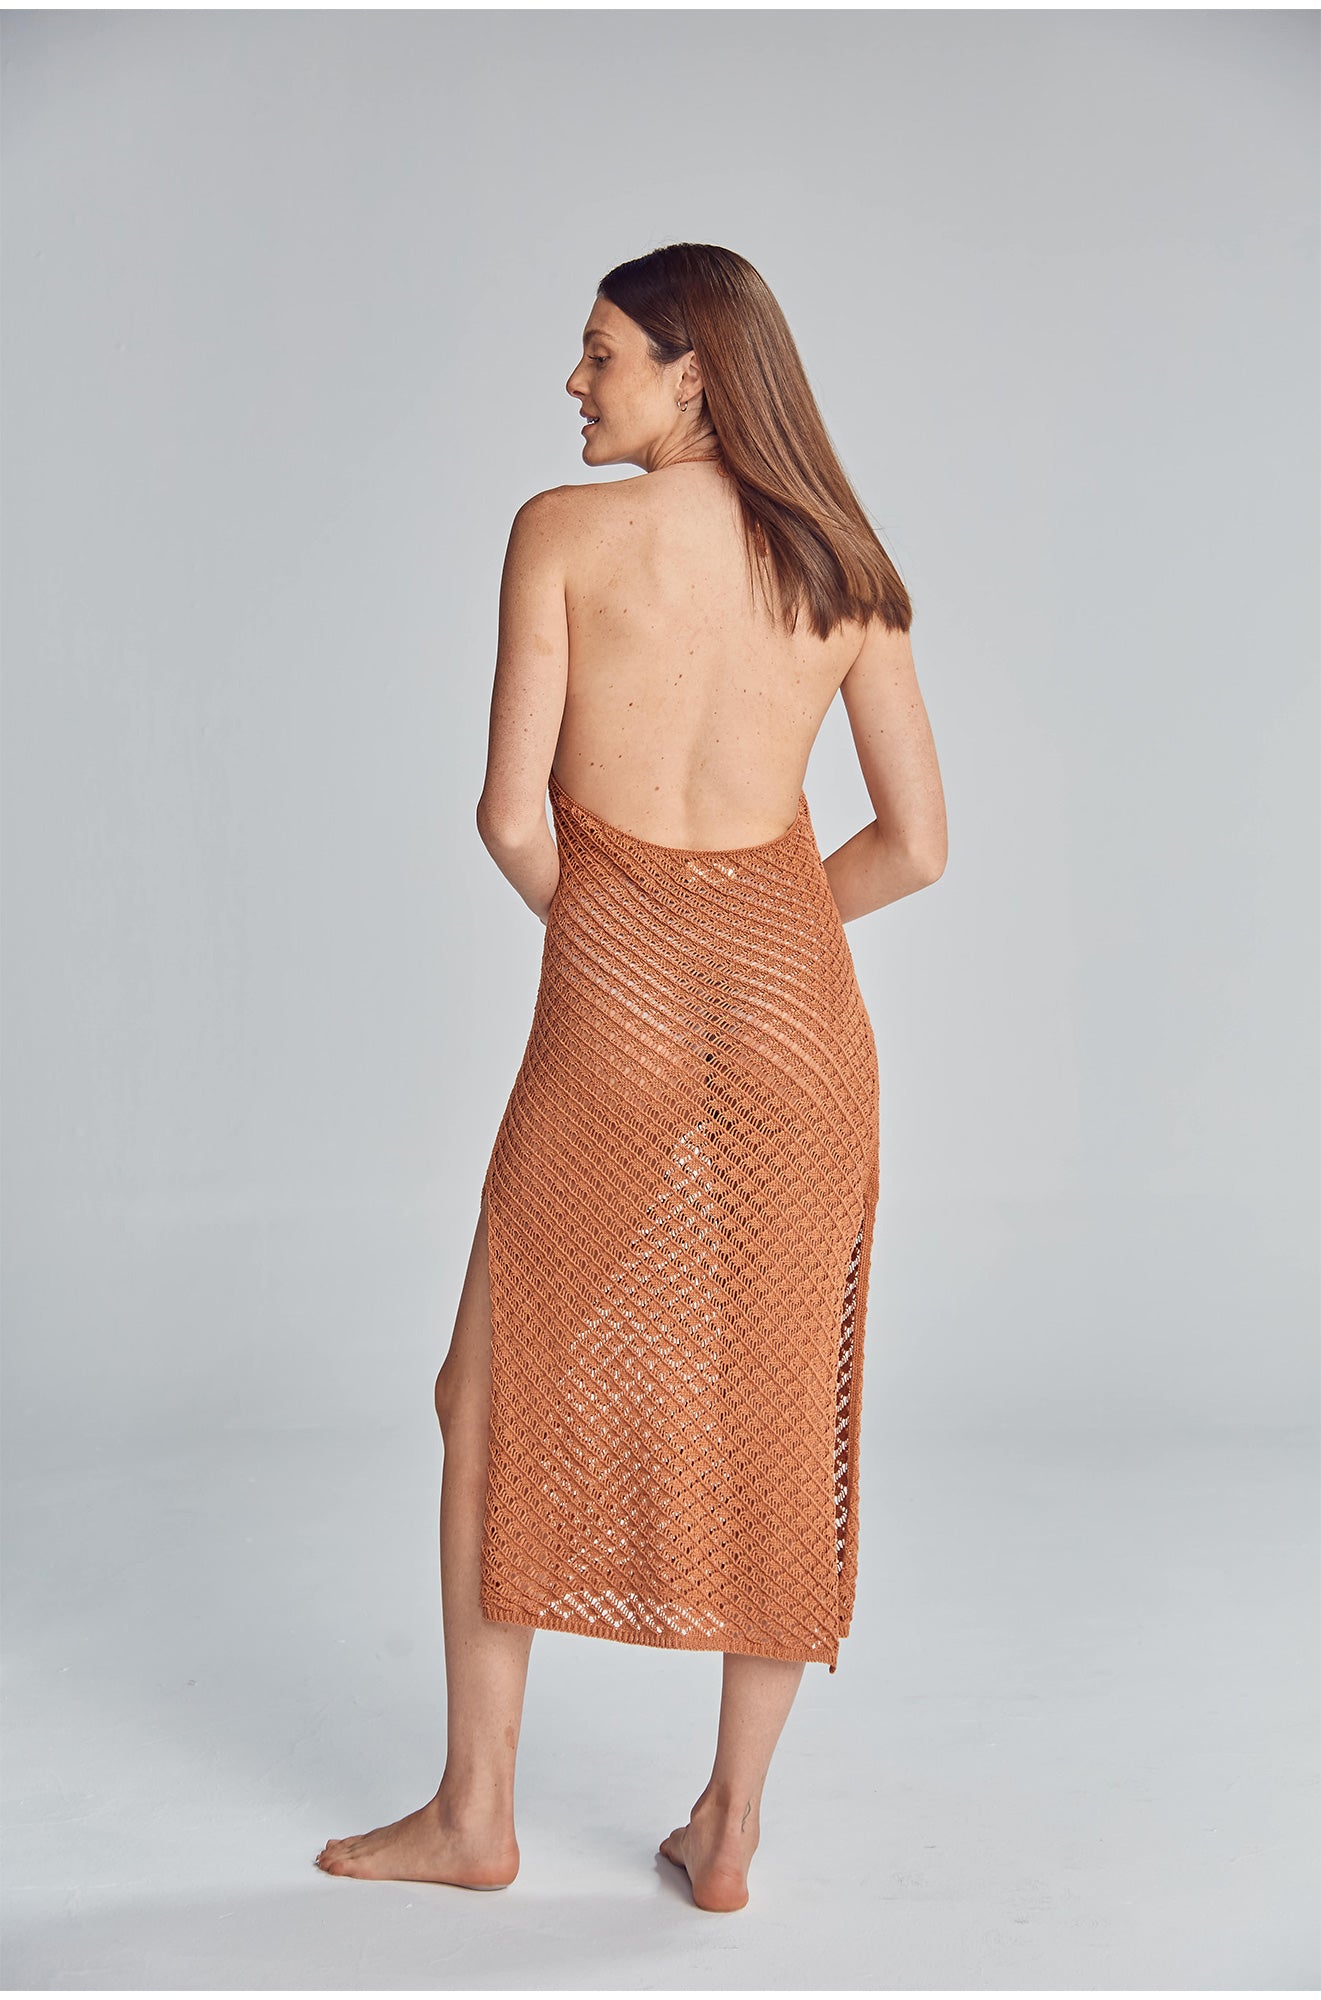 Halter midi dress featuring a side slit, and fully exposed back. Handmade crochet by Peruvian artisans.  50% Cotton 50% Polyester. Made in Peru.